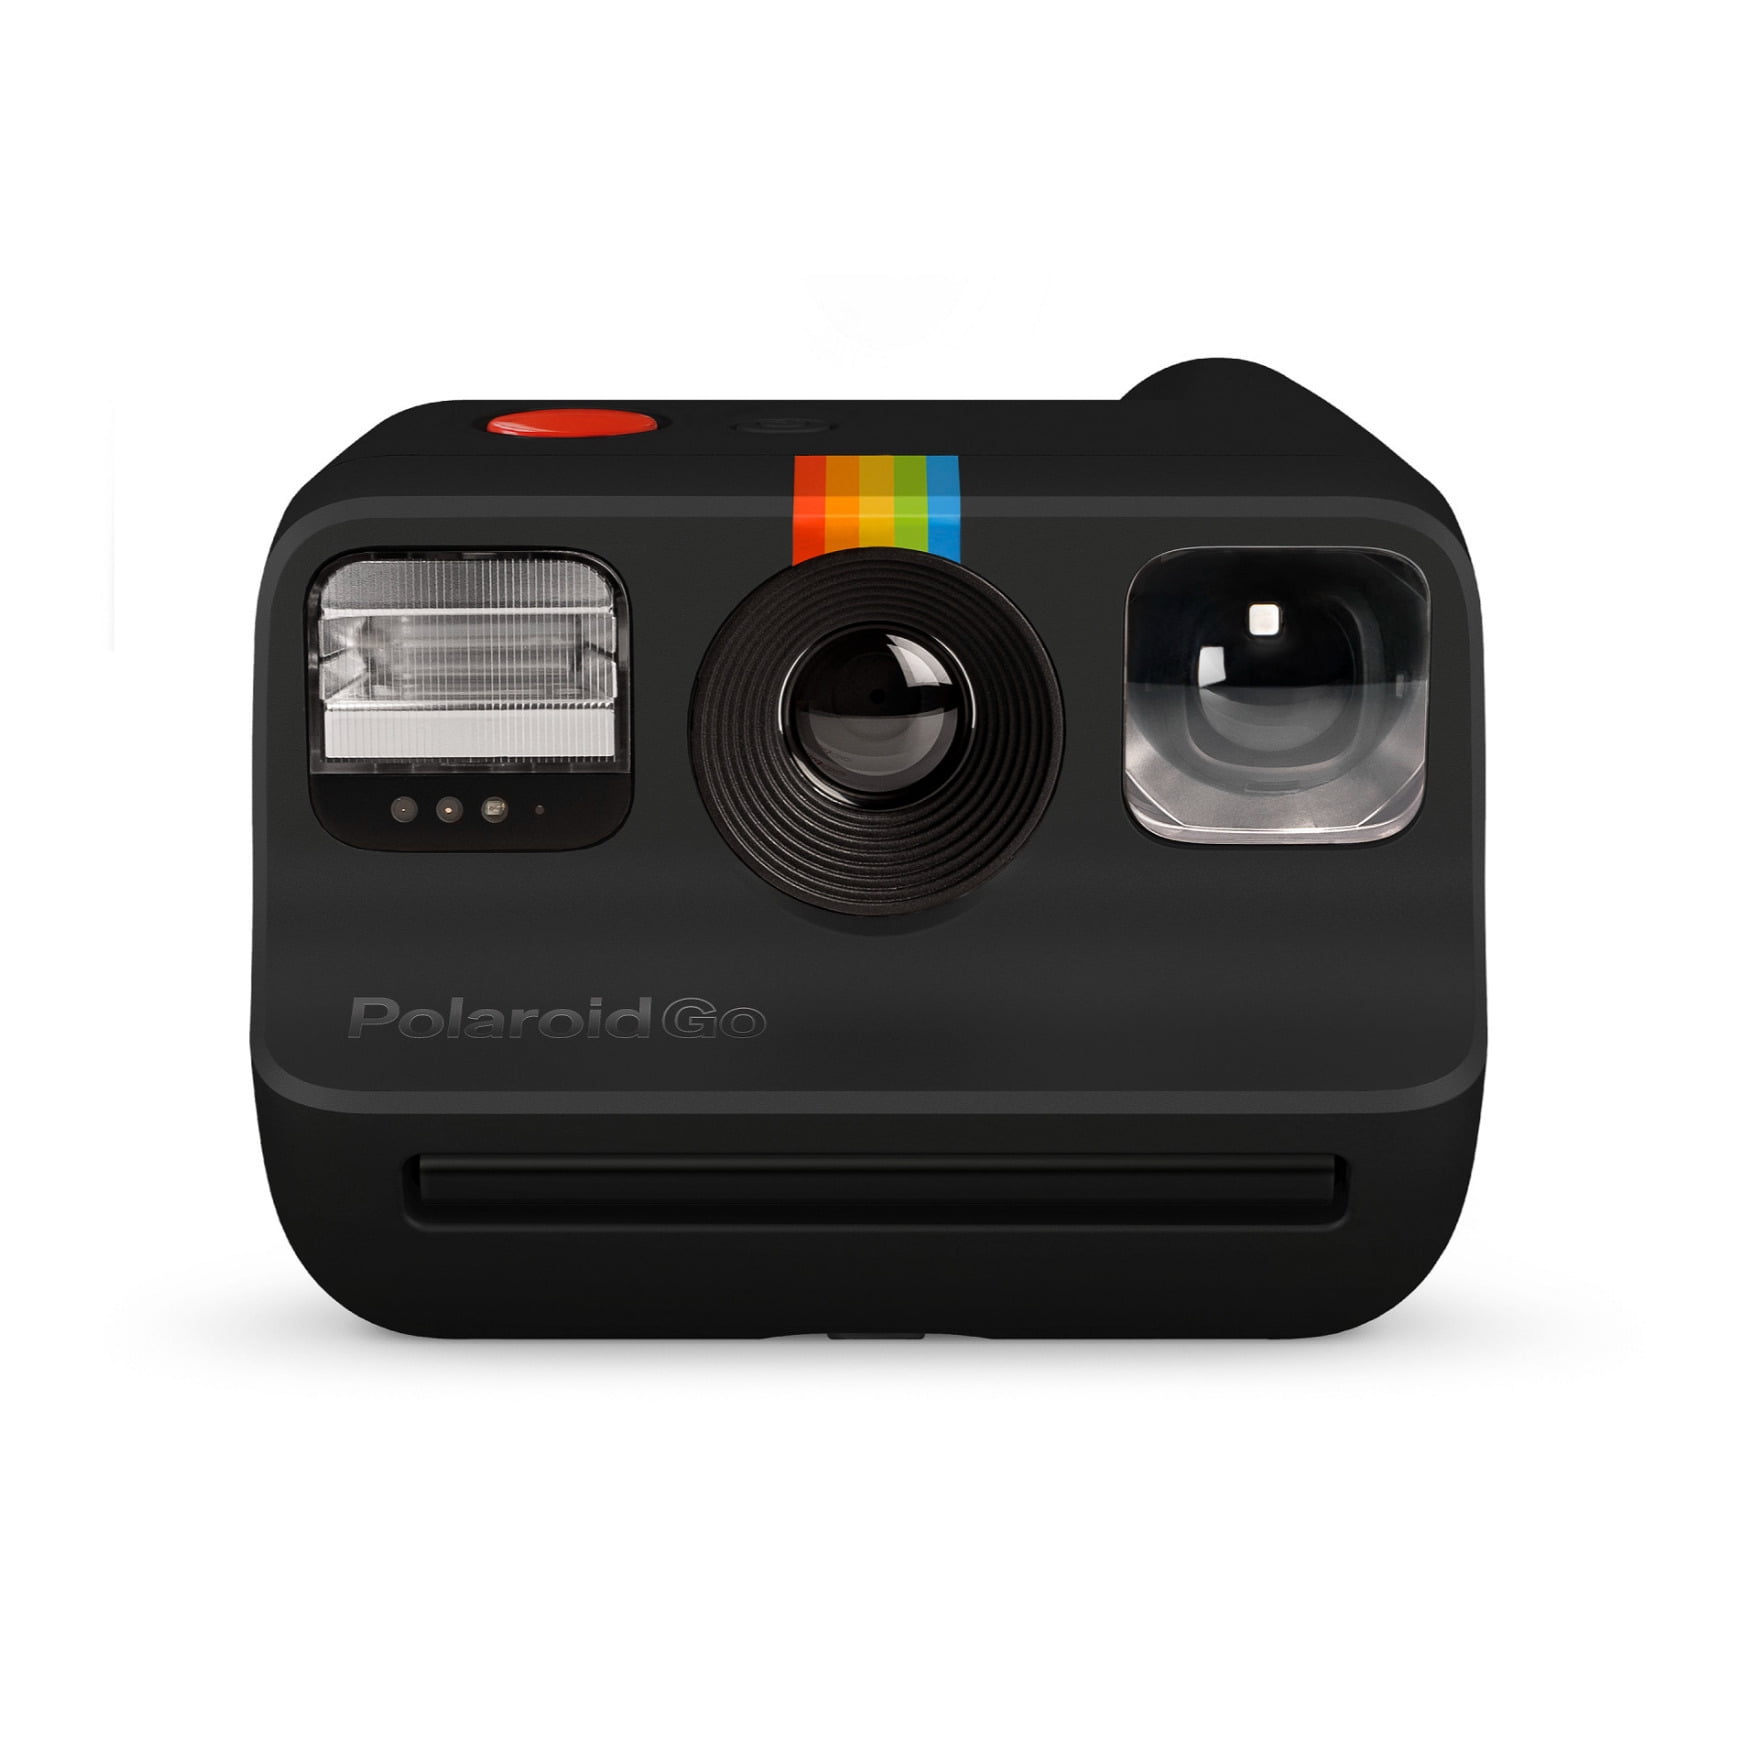 Polaroid Go Camera and Film Pack Pictures + Specifications : r